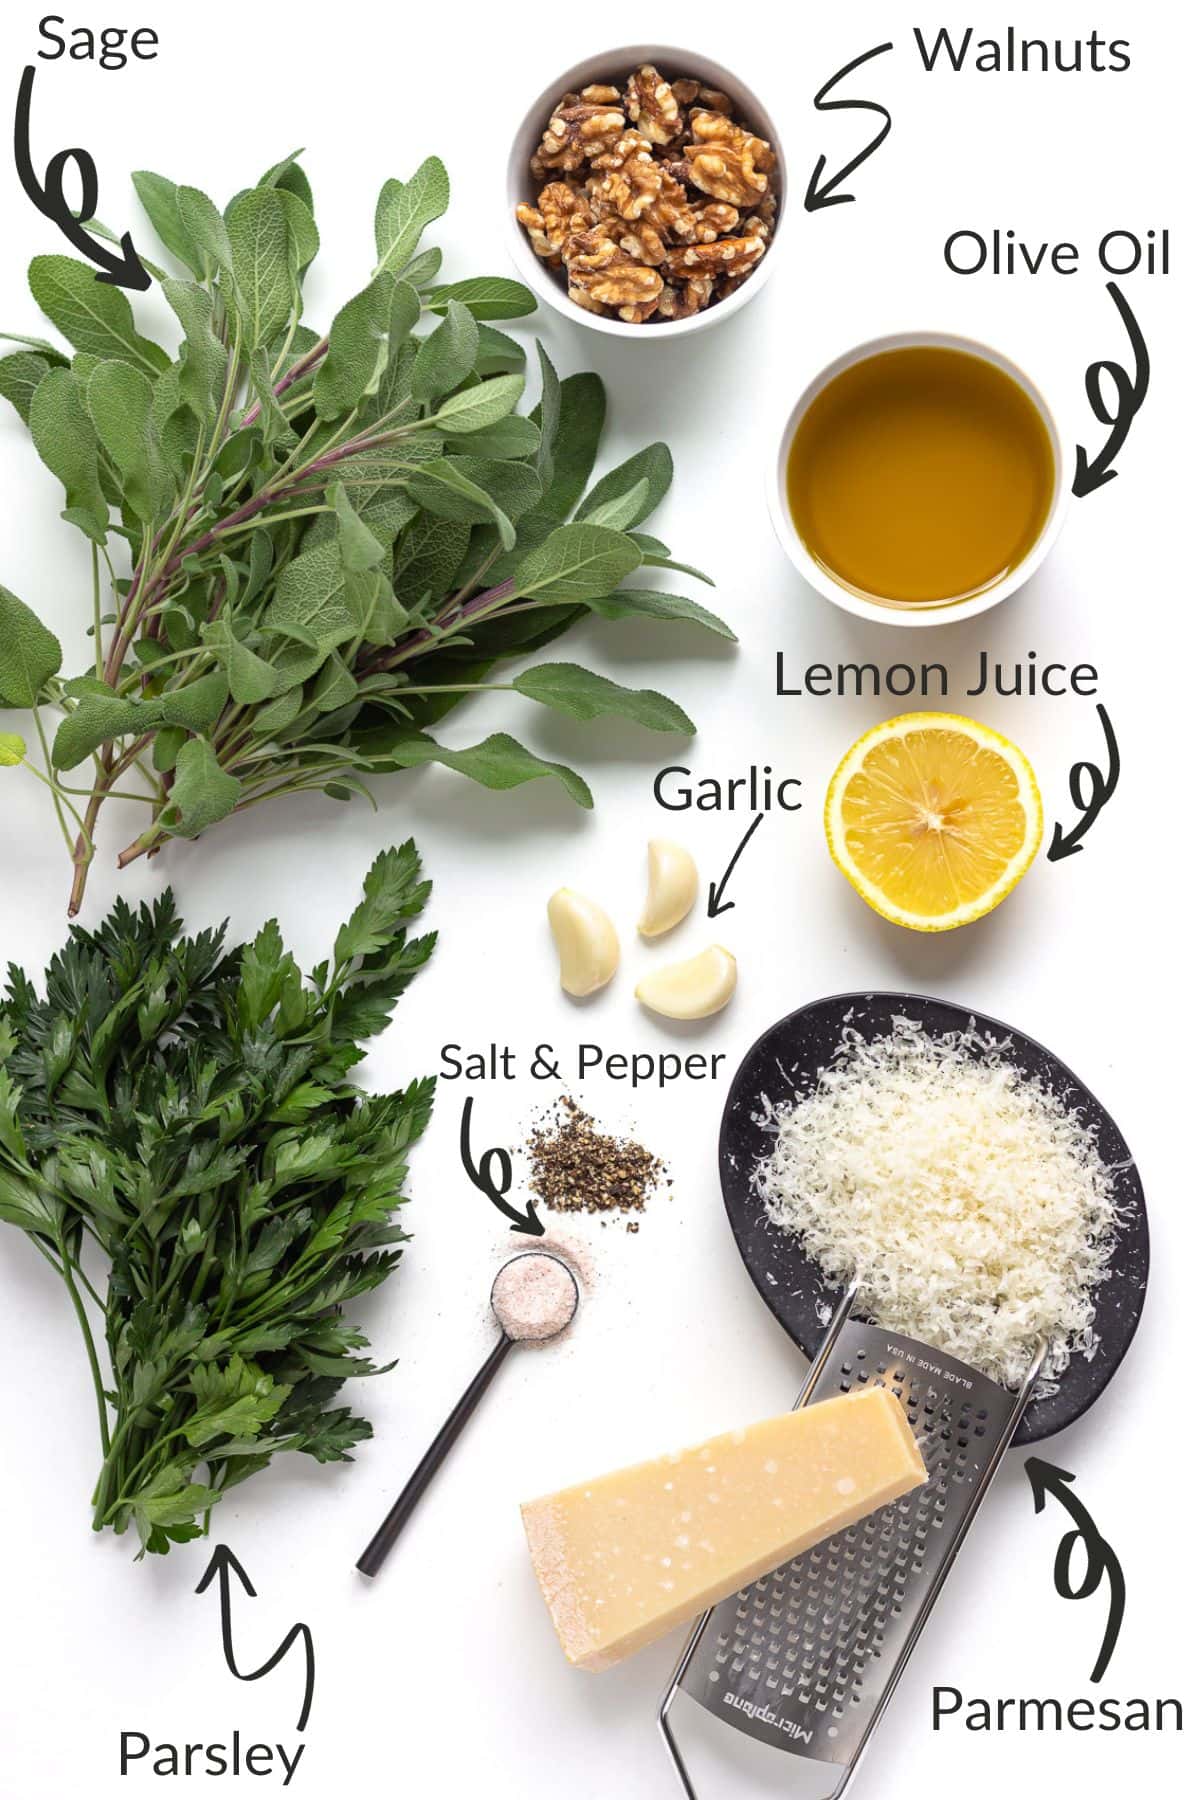 Labelled photo of ingredients needed to make sage pesto.